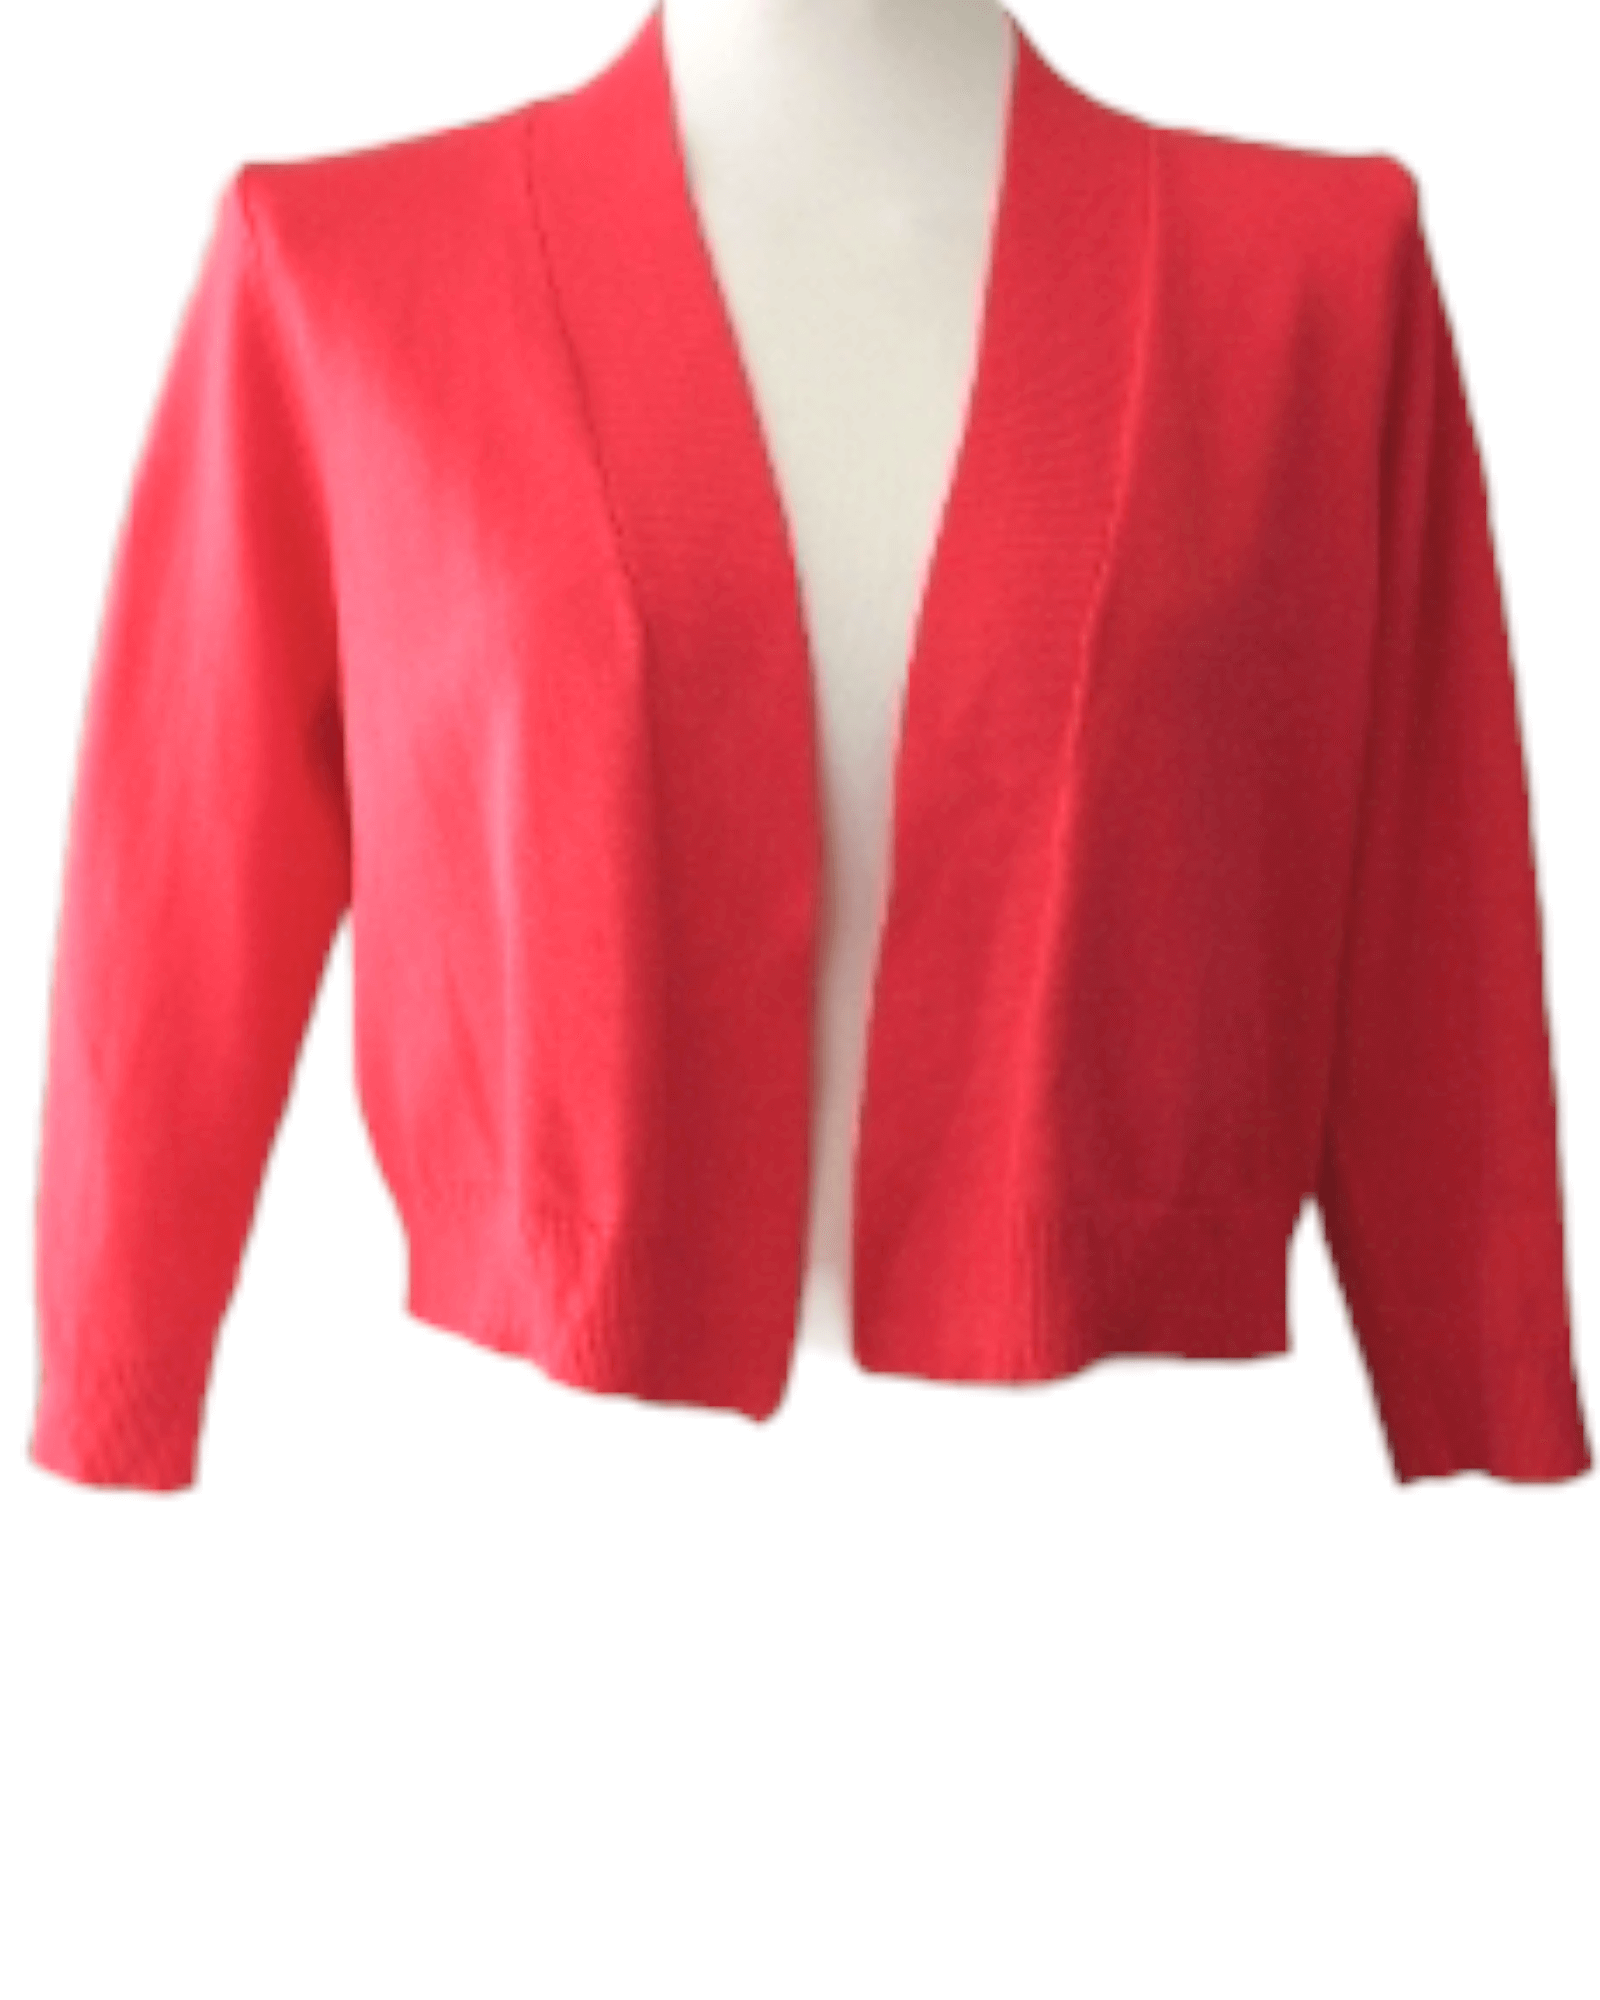 Warm Spring VERVE AMI coral reef open cardigan sweater